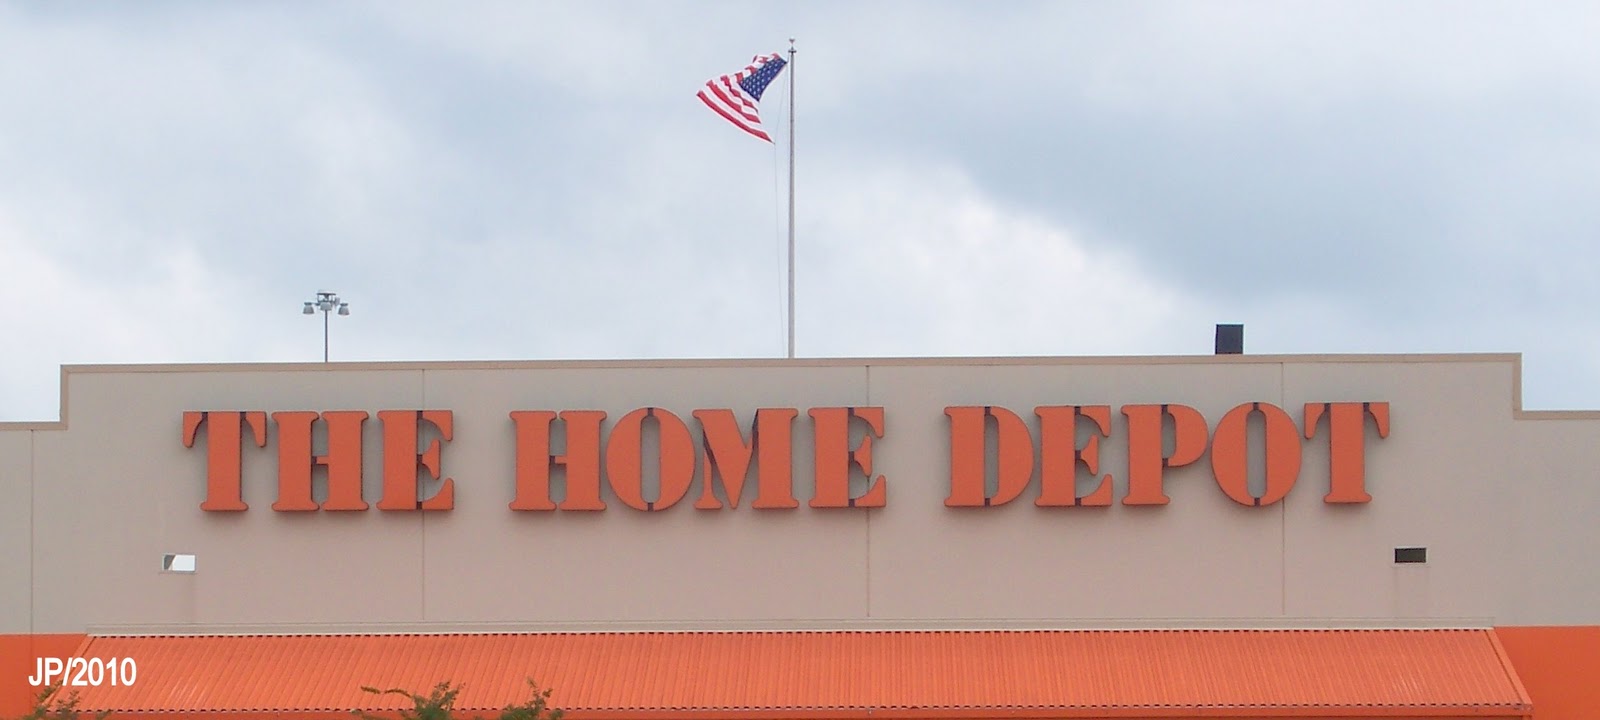  HOME DEPOT LAKE CITY FLORIDA BUILDING MATERIALS Store, Columbia County